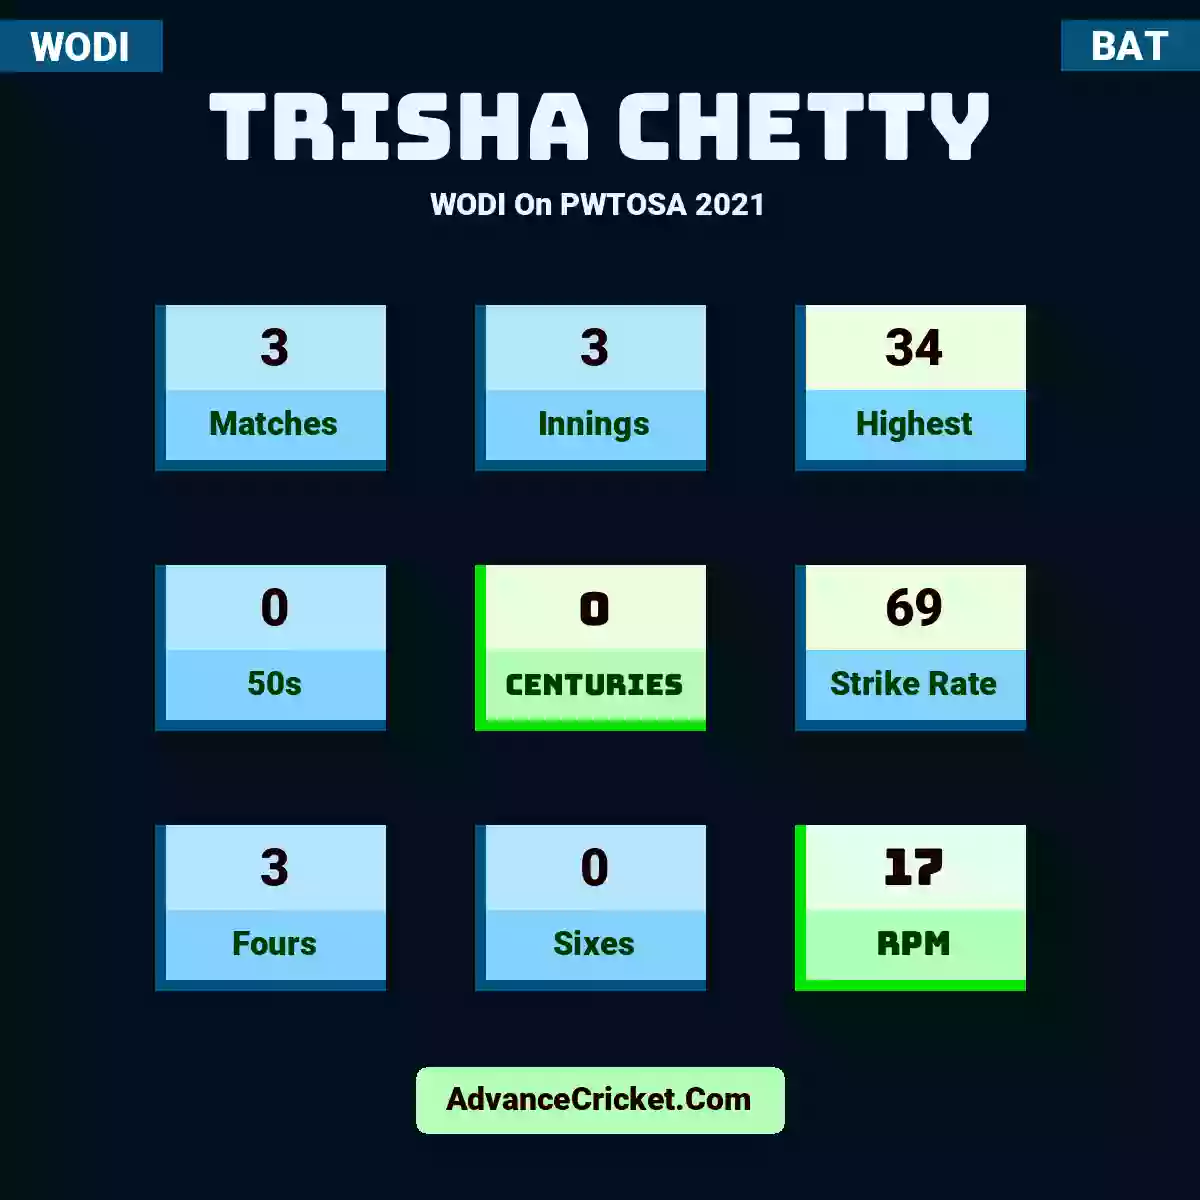 Trisha Chetty WODI  On PWTOSA 2021, Trisha Chetty played 3 matches, scored 34 runs as highest, 0 half-centuries, and 0 centuries, with a strike rate of 69. T.Chetty hit 3 fours and 0 sixes, with an RPM of 17.